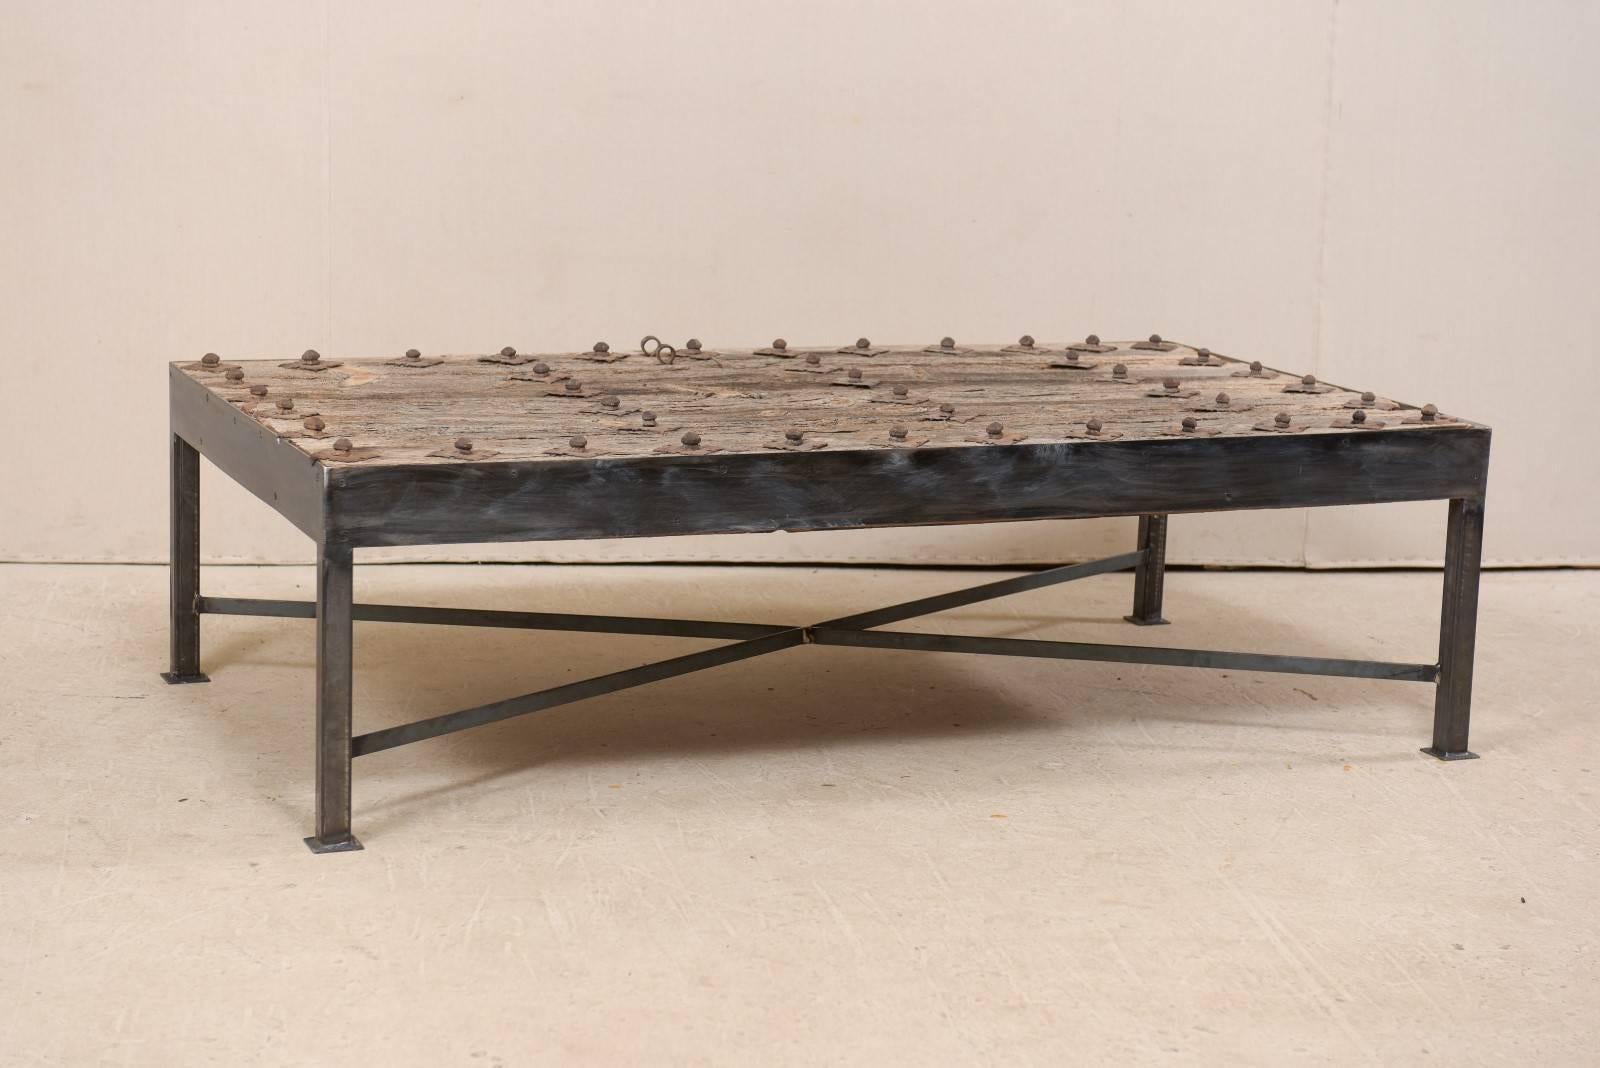 This is a custom coffee table made from an 18th century Spanish door. This wonderful coffee table has been fashioned from an 18th century Spanish door, with it's elongated wood planks, which are beautifully weathered with great patina, and adorn